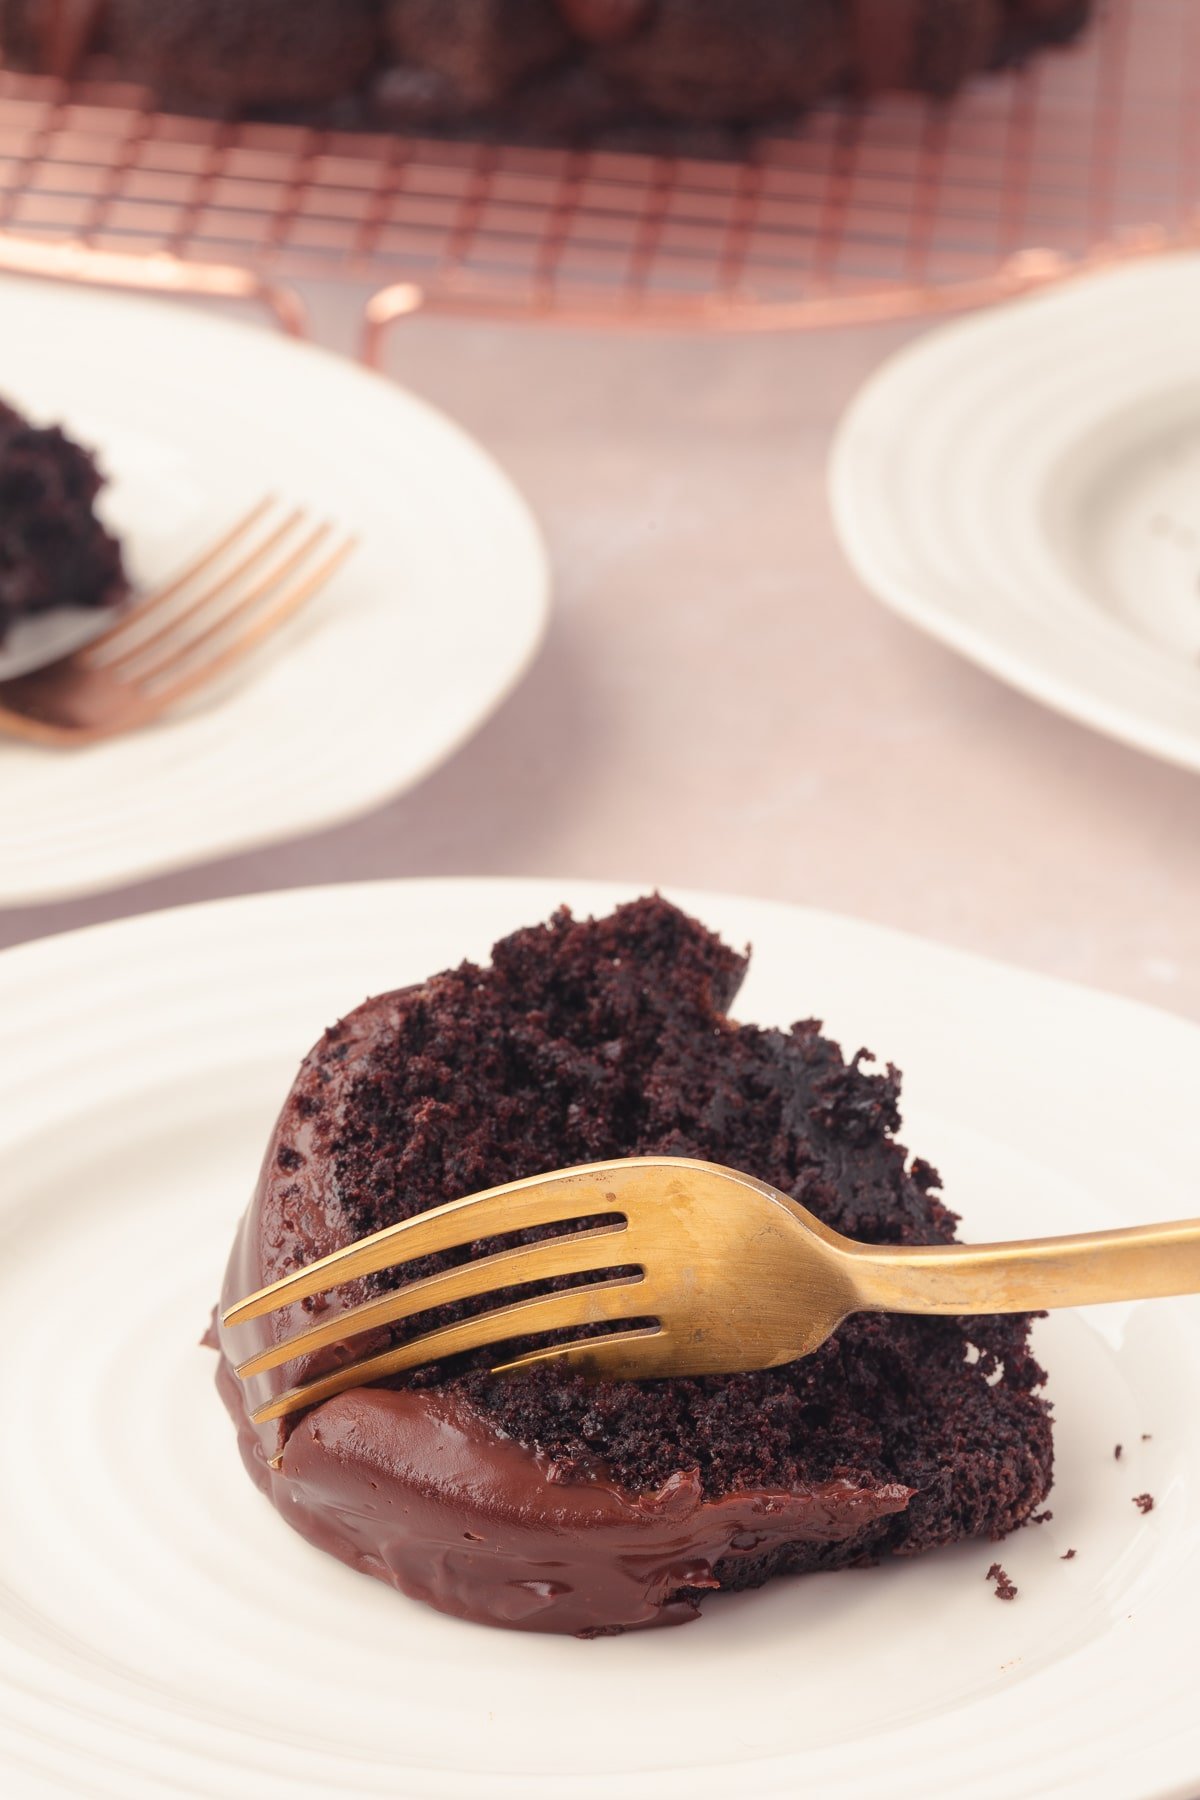 A fork cutting into a slice of chocolate bundt cake